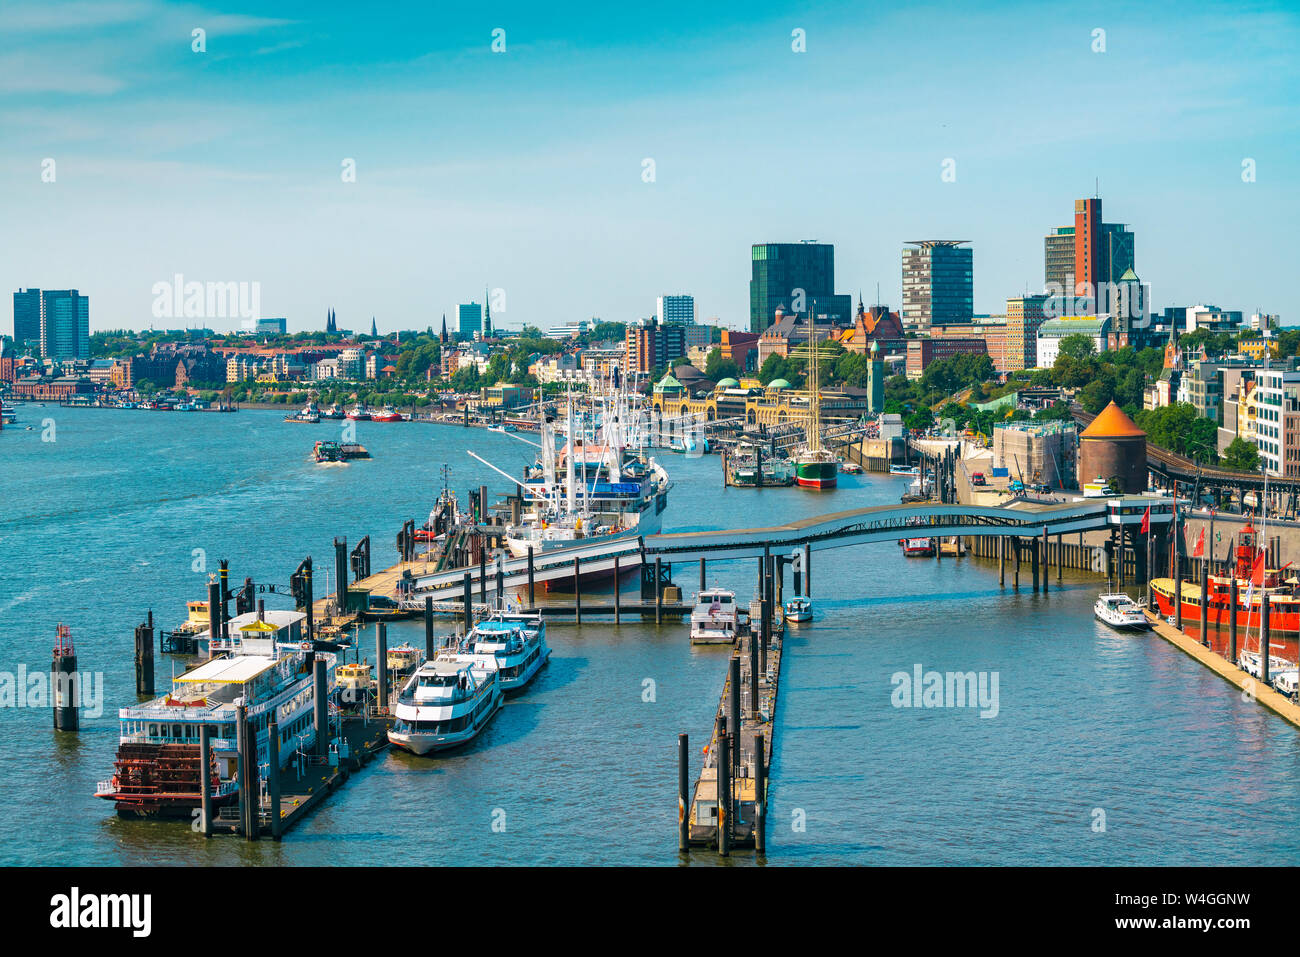 Landing Stages seen from Elbphilharmonie, Hamburg, Germany Stock Photo